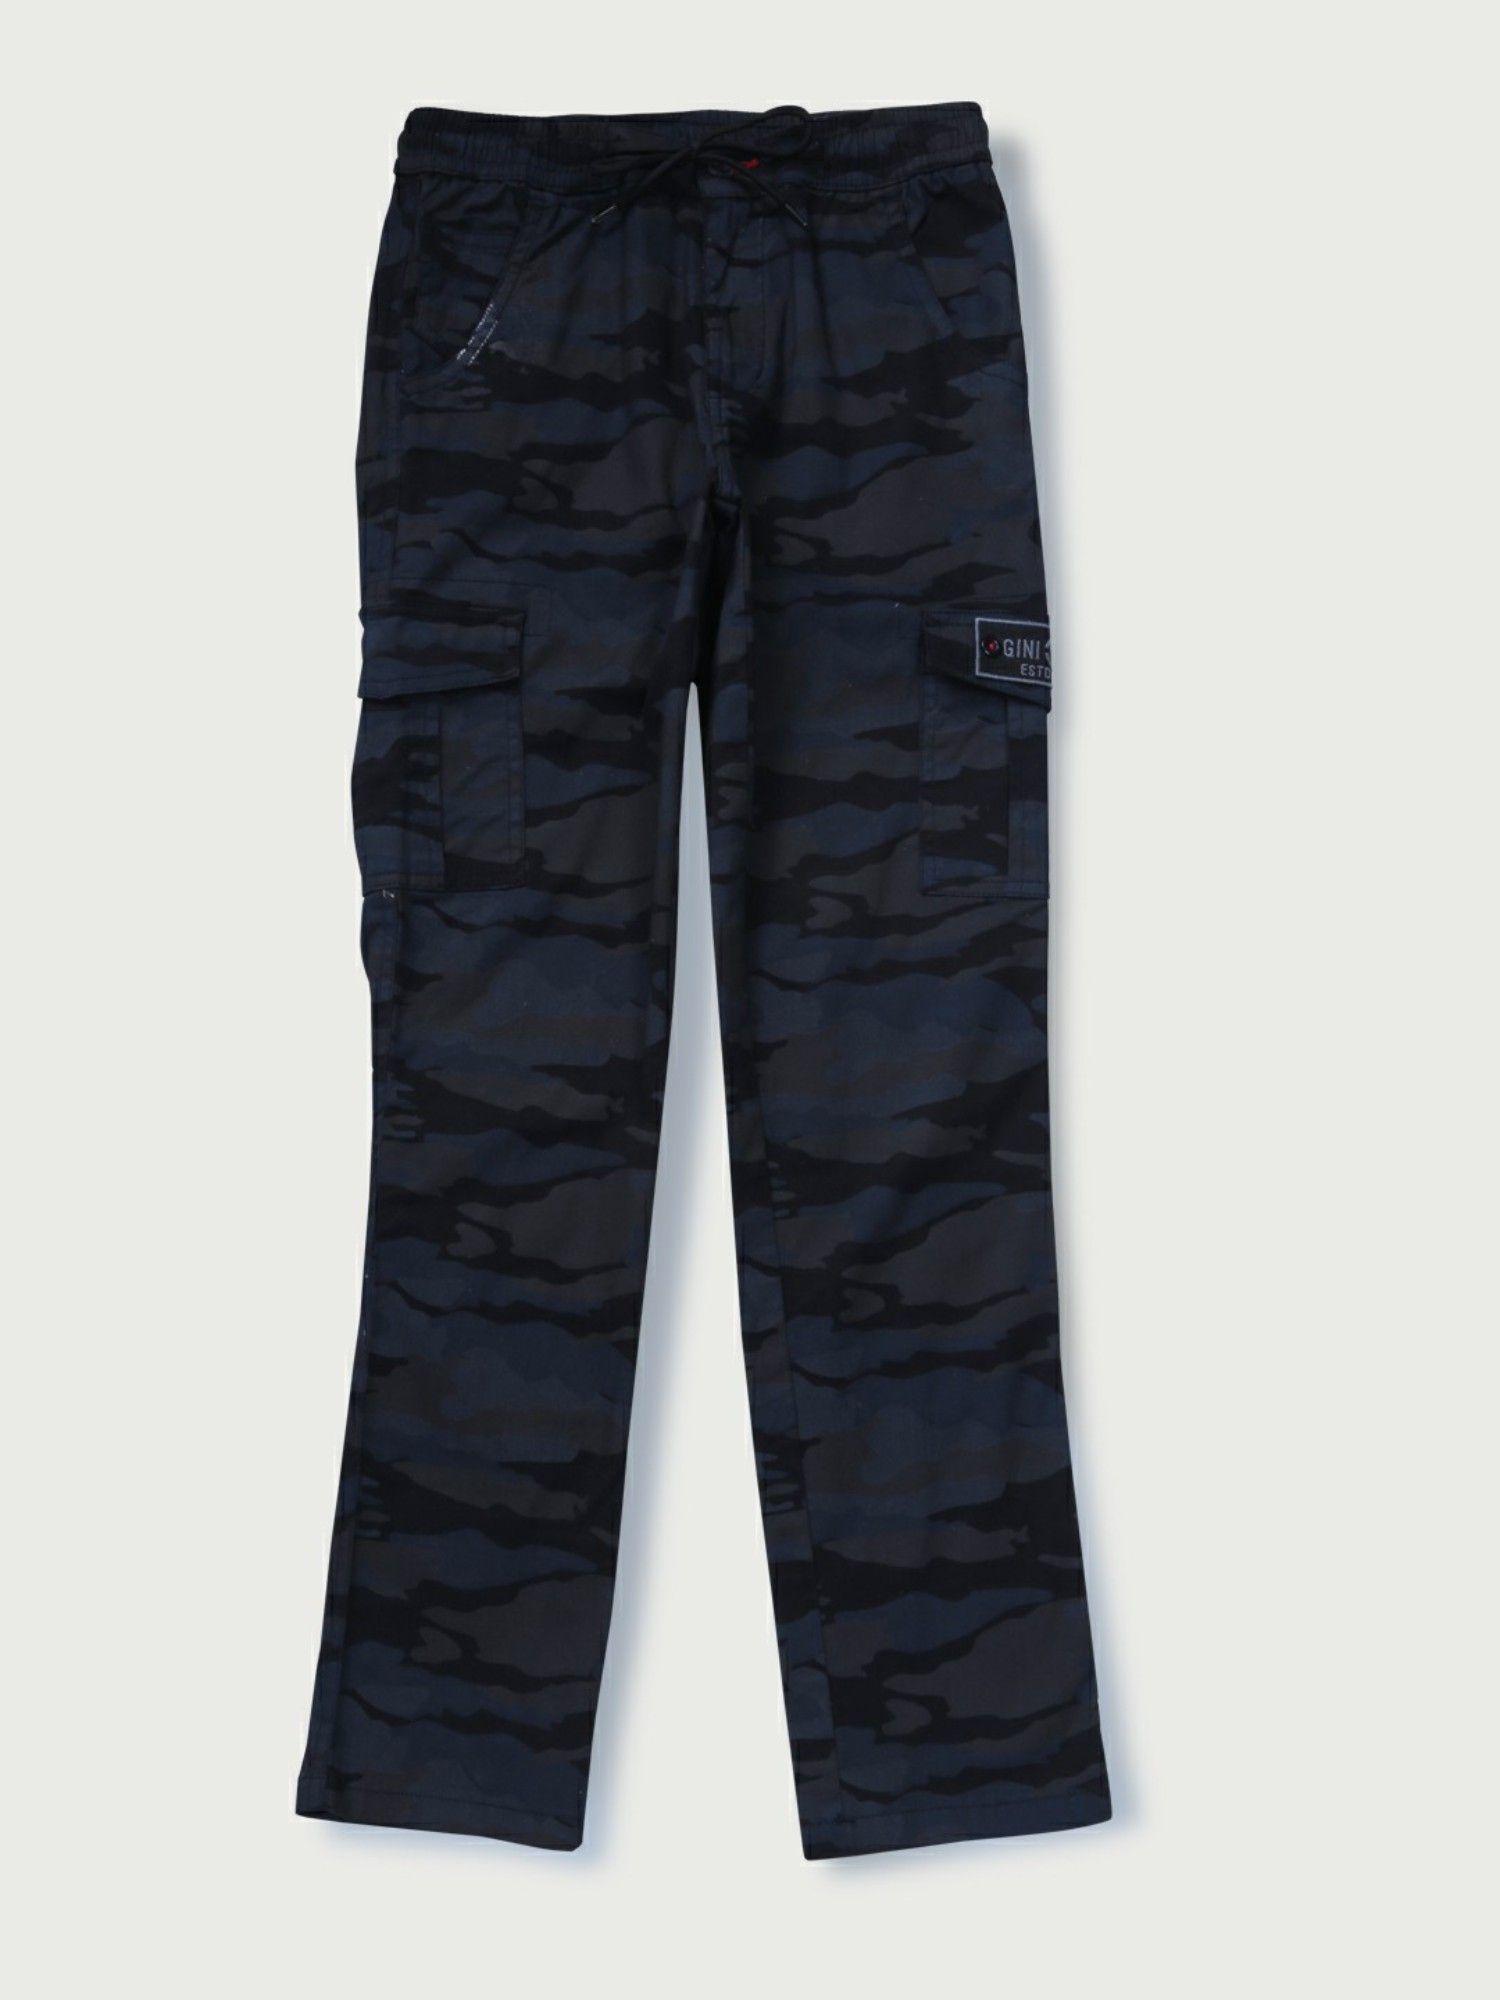 boys-navy-blue-cotton-camouflage-trouser